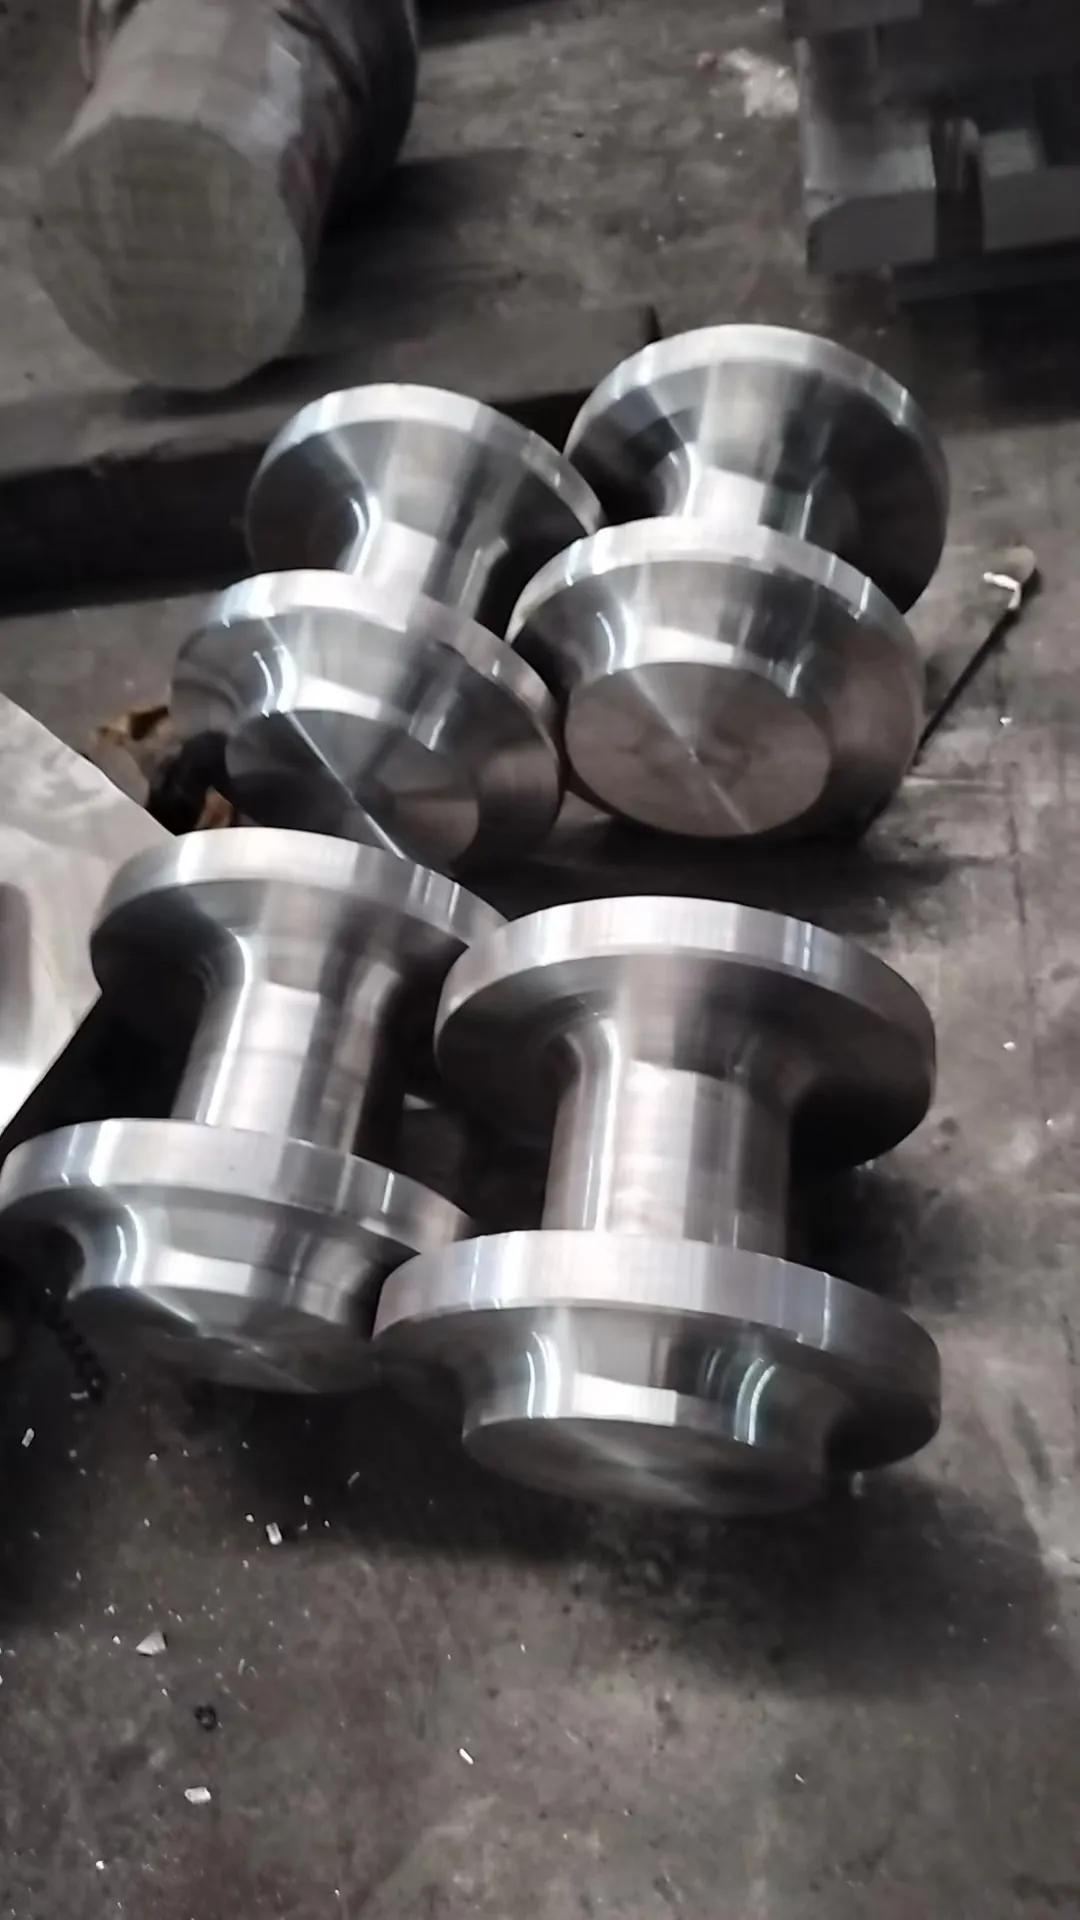 What are the applications of aluminum alloy forgings